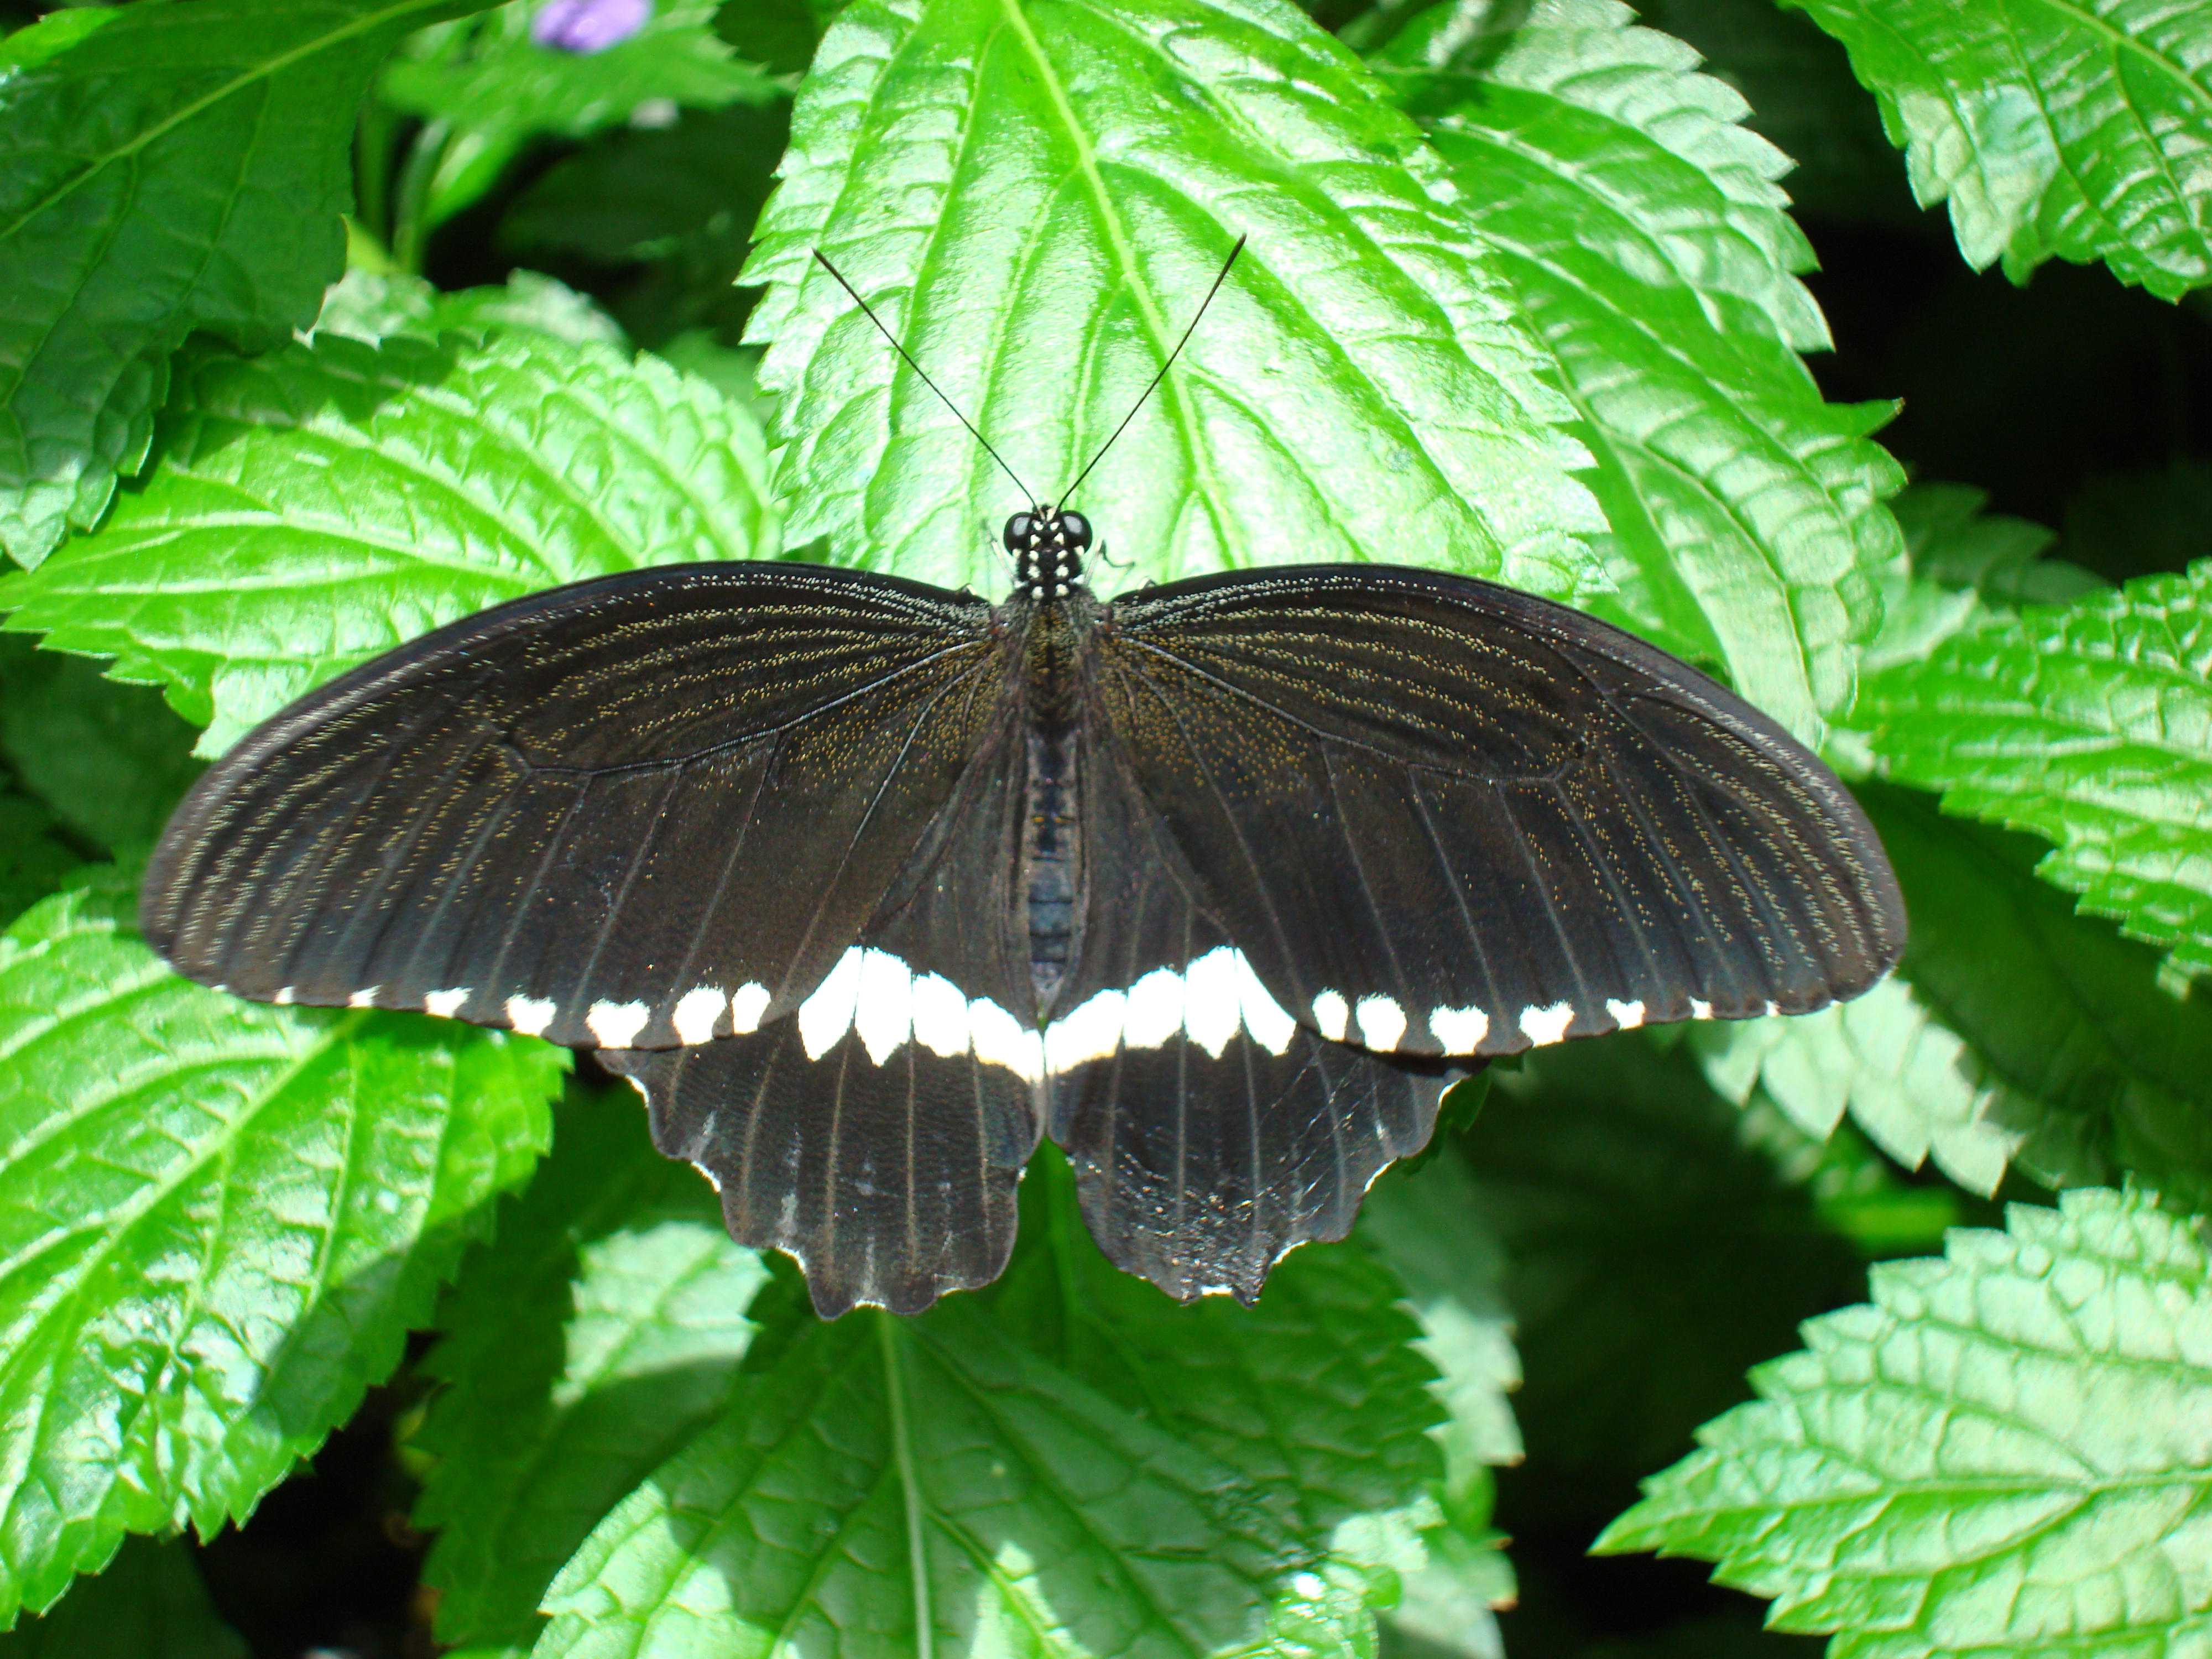 Male Common Mormon butterfly at the Niagara Parks Butterfly Conservatory, 2010 B